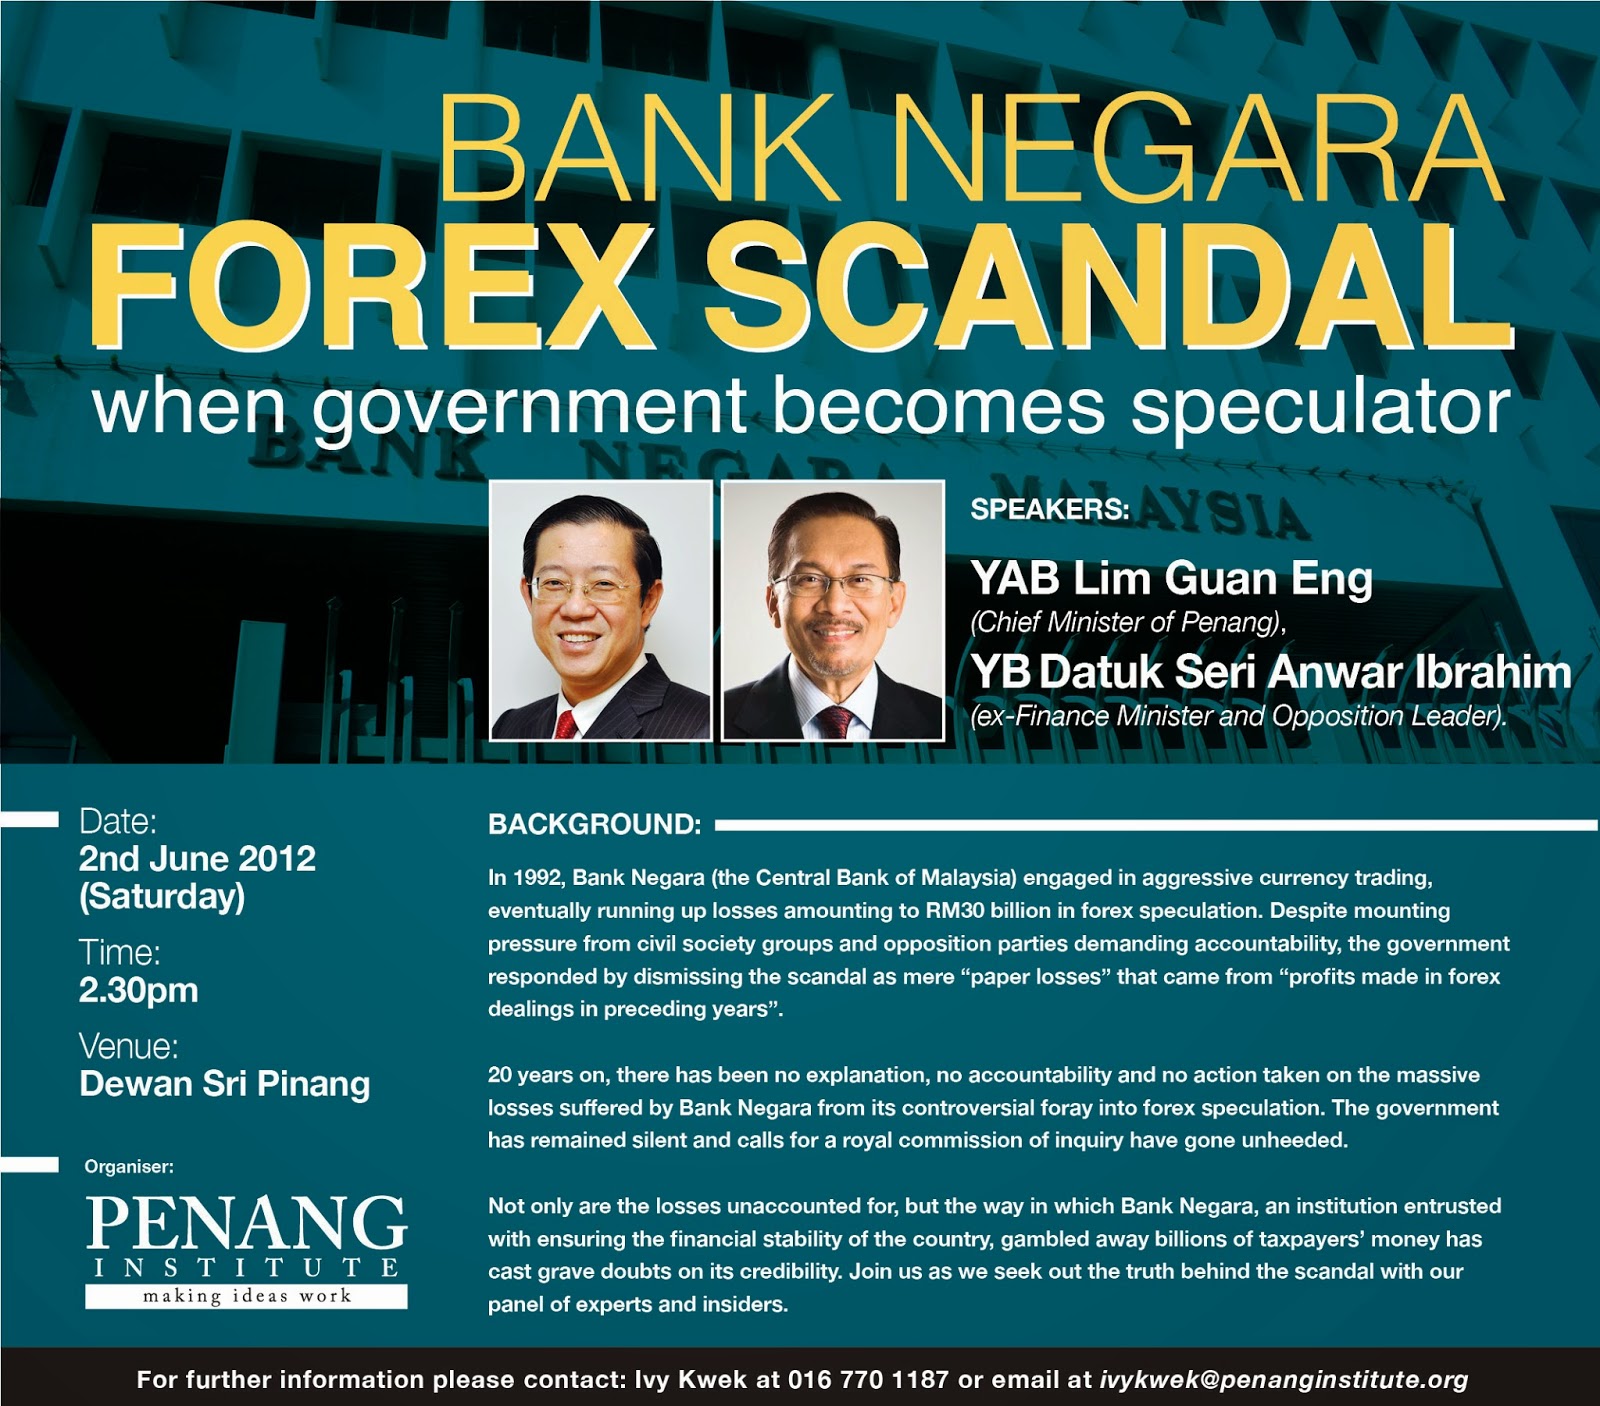 One Reply to “The Bank Negara RM30 Billion Forex Losses Scandal”